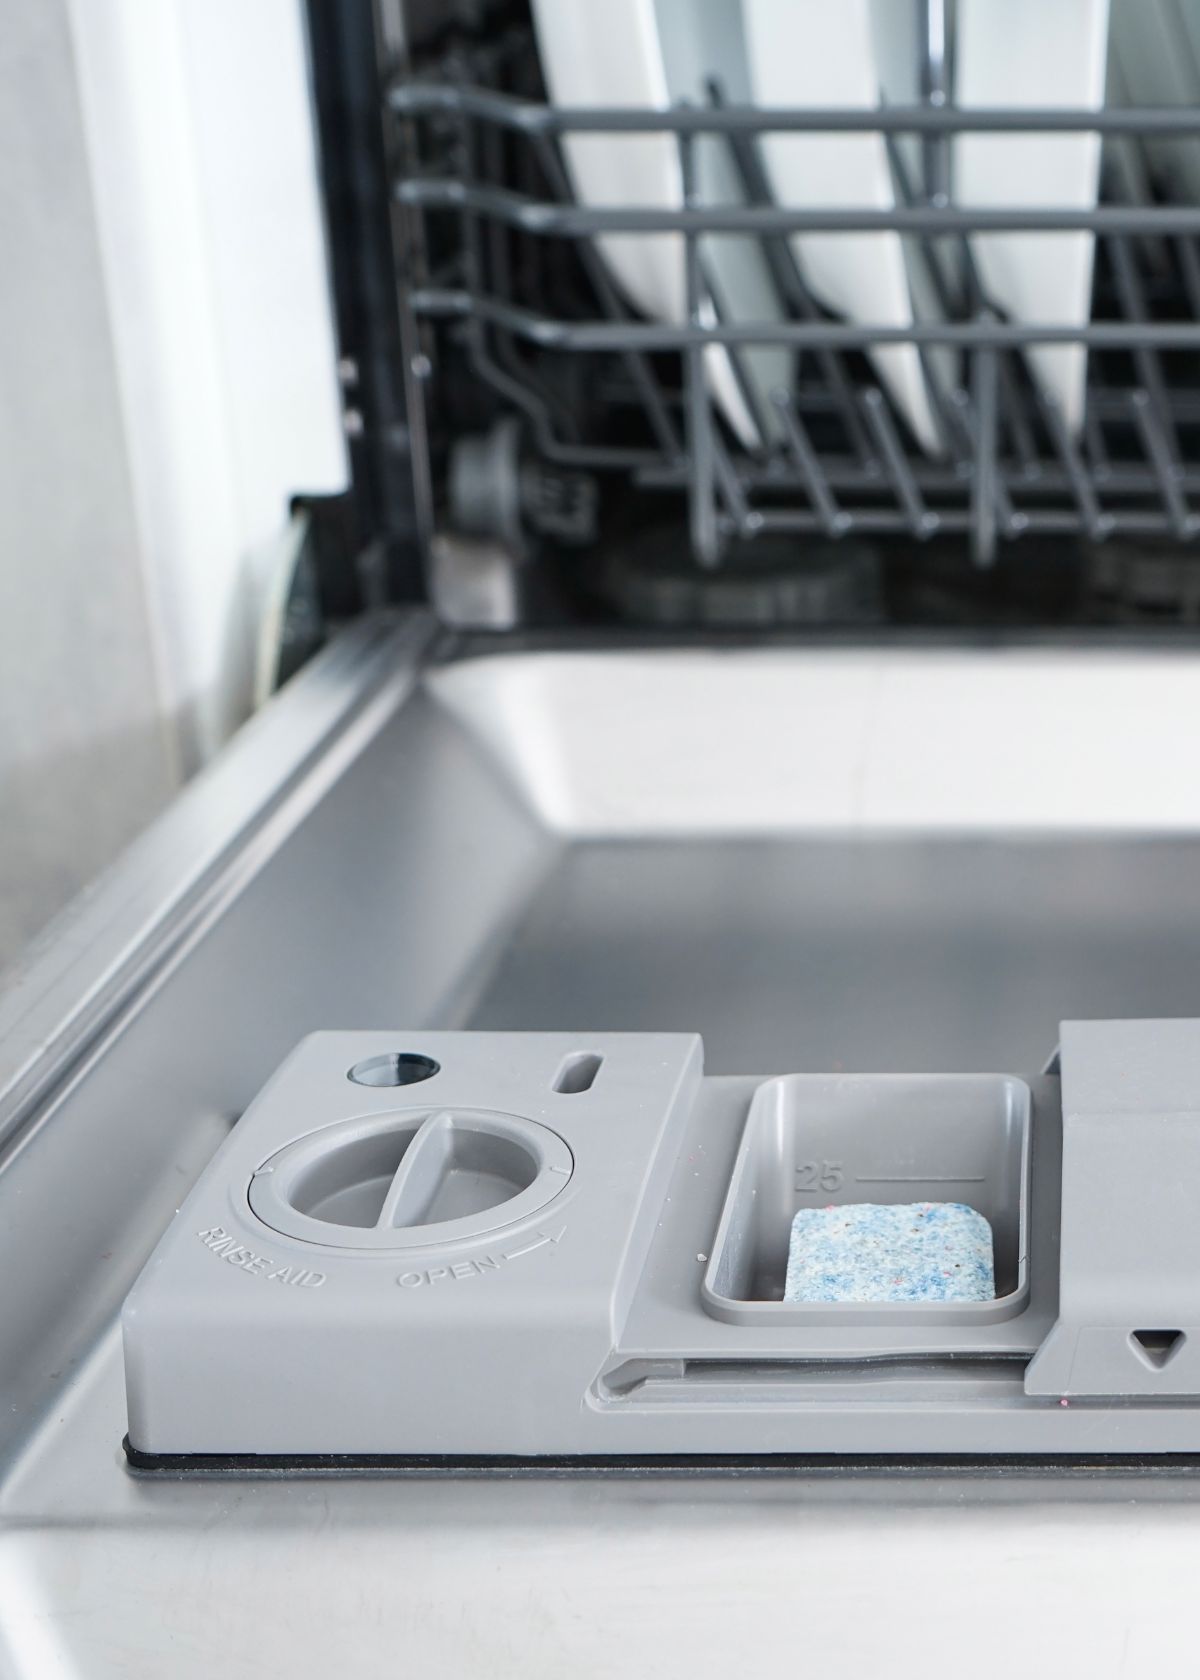 How To Use Pods In Dishwasher How to Use Dishwasher Pods